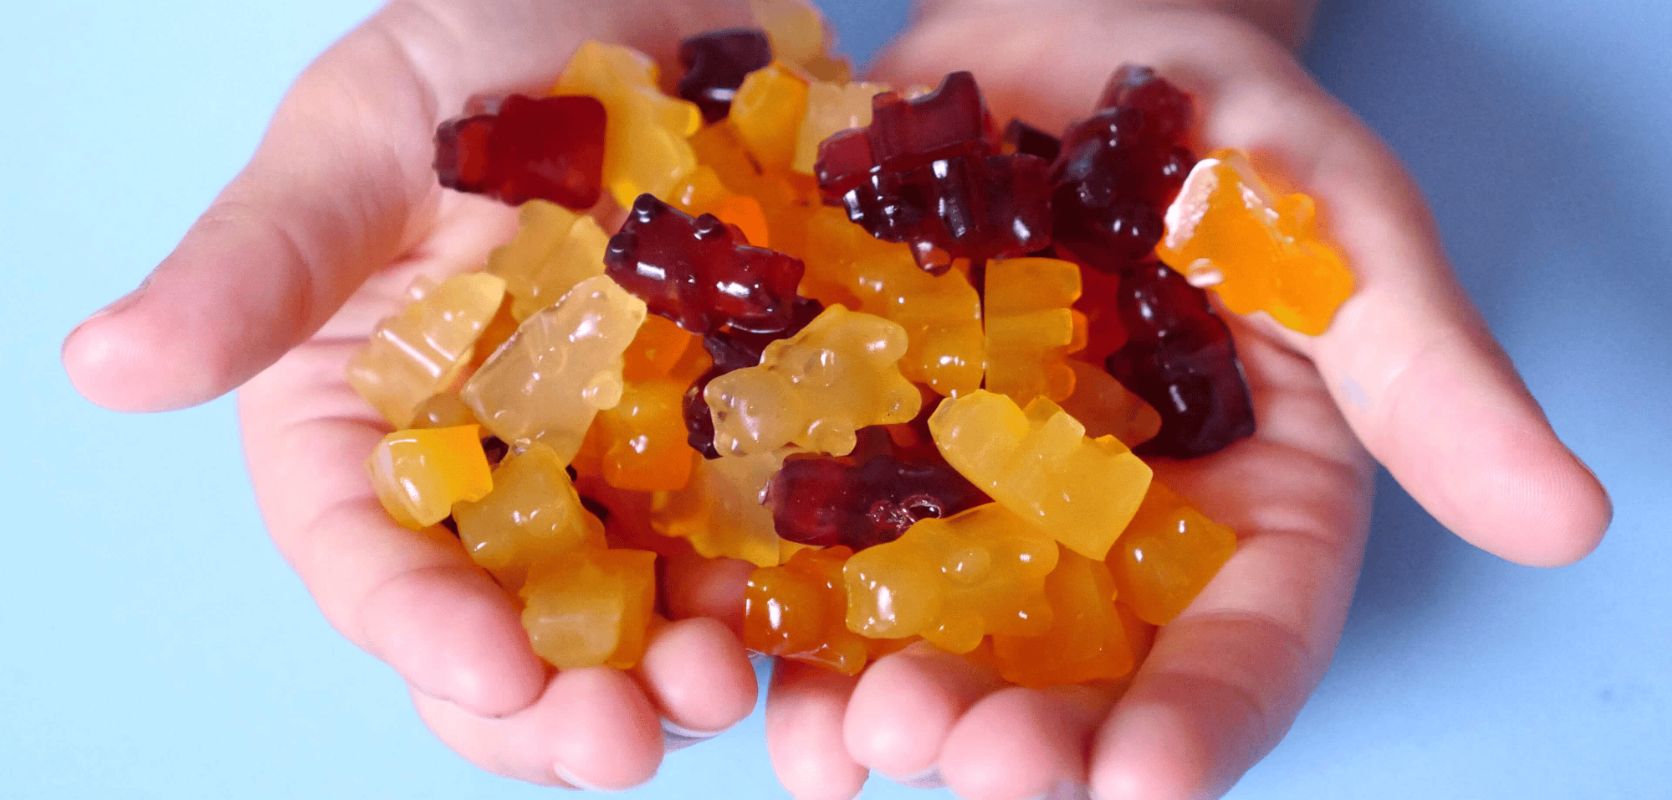 Alright, let's get our DIY on and learn how to make some fantastic cannabis gummies! Before we start, remember that the process involves using cannabis-infused oil or tincture.